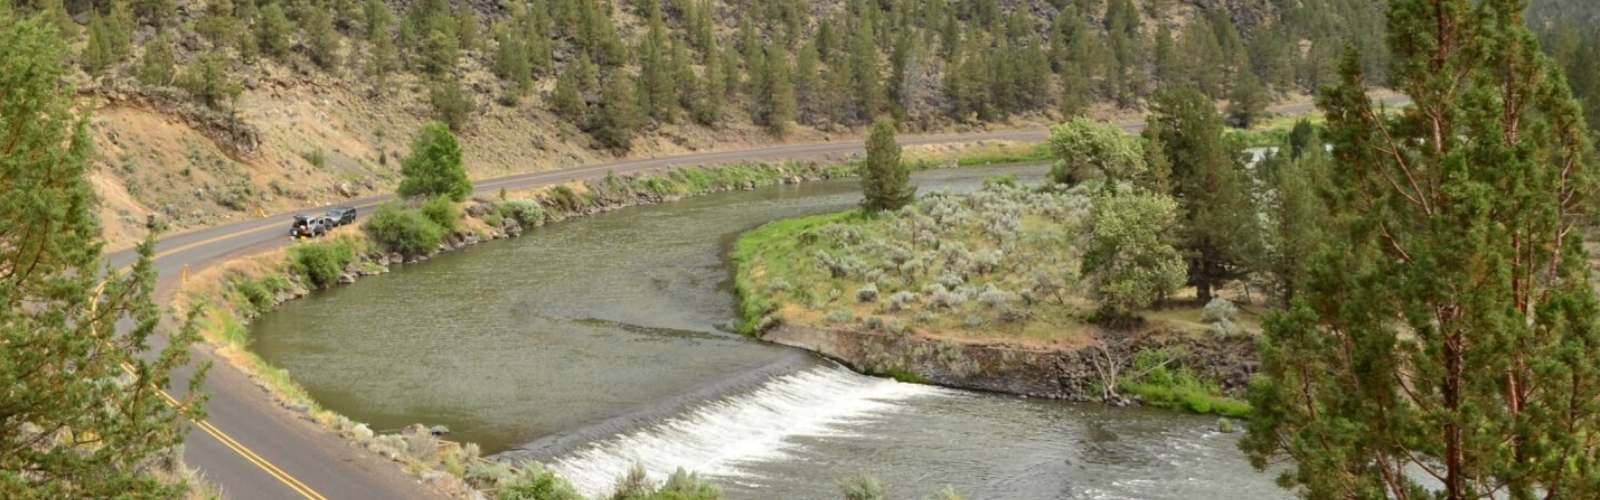 Stearns Dam | Photo by Crooked River Watershed Council